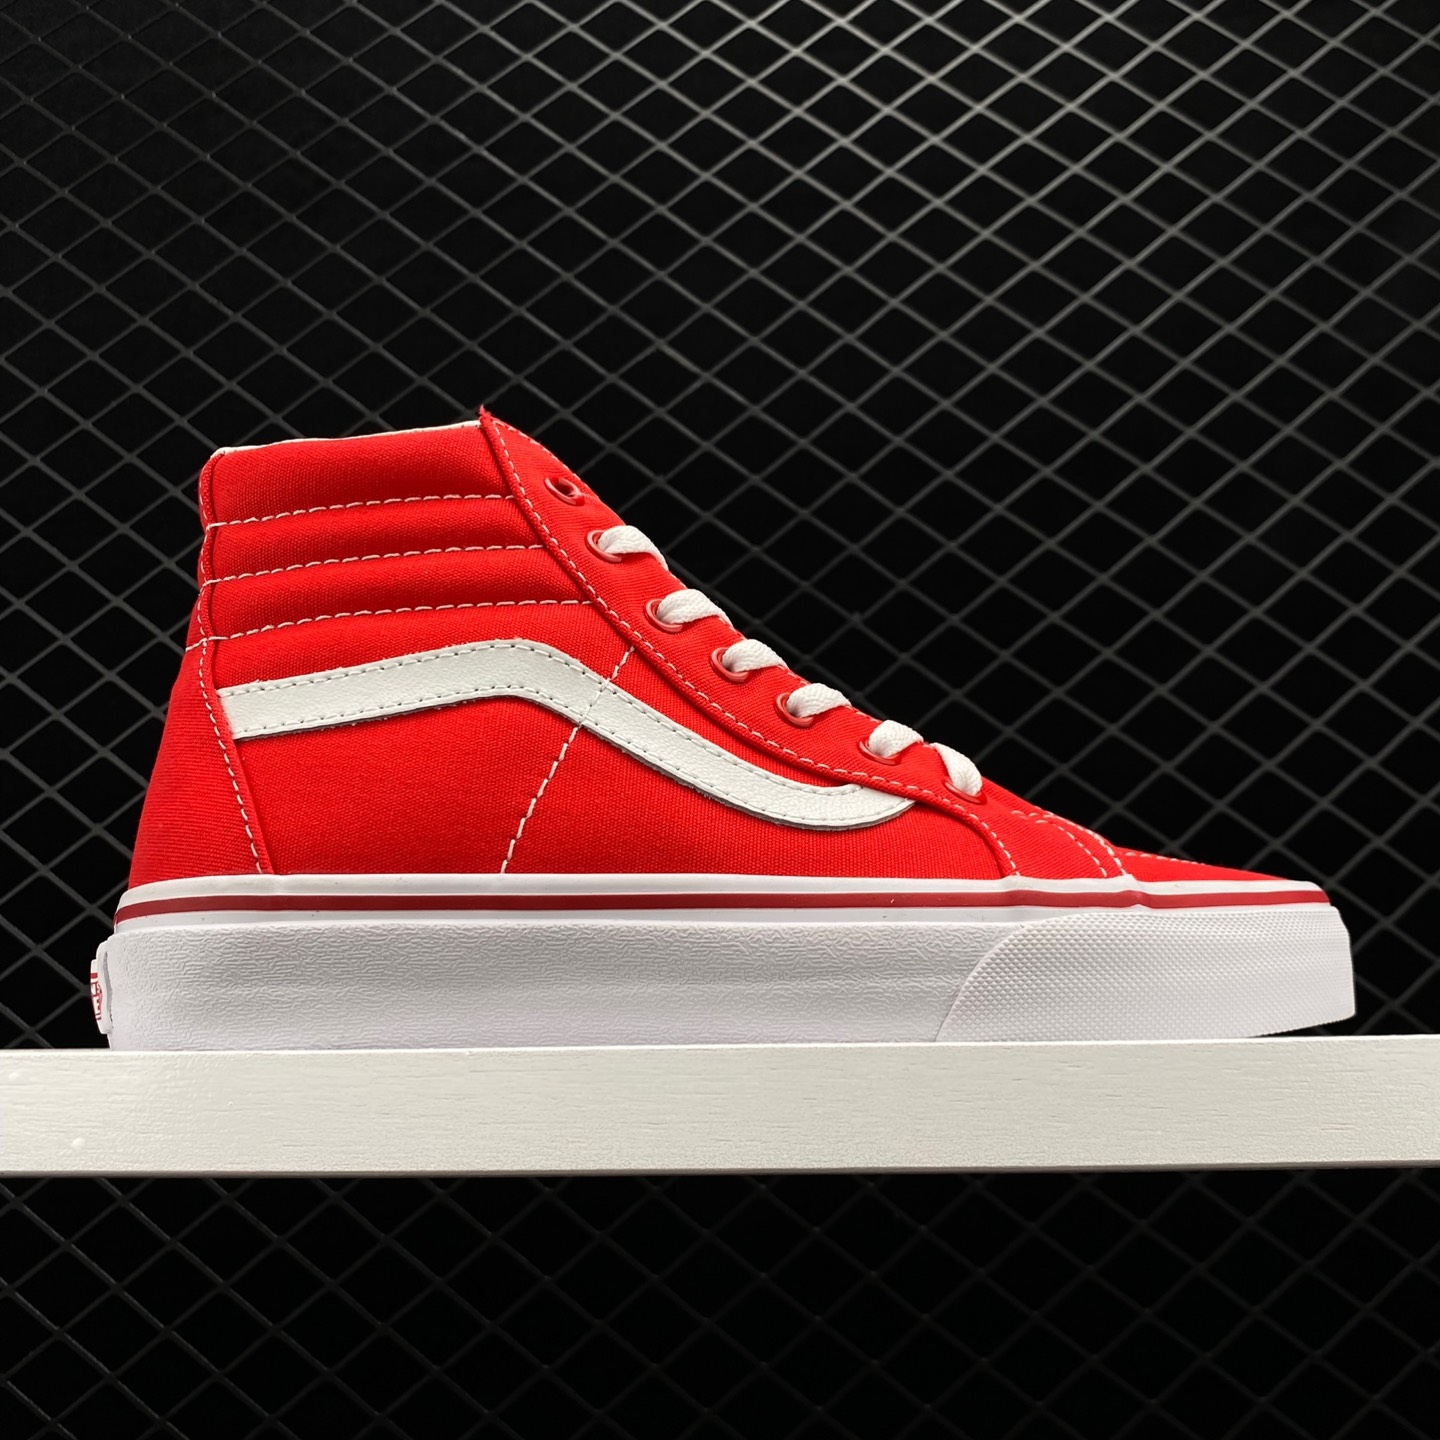 Vans SK8-HI ComfyCush Red - Stylish and Comfortable Sneakers